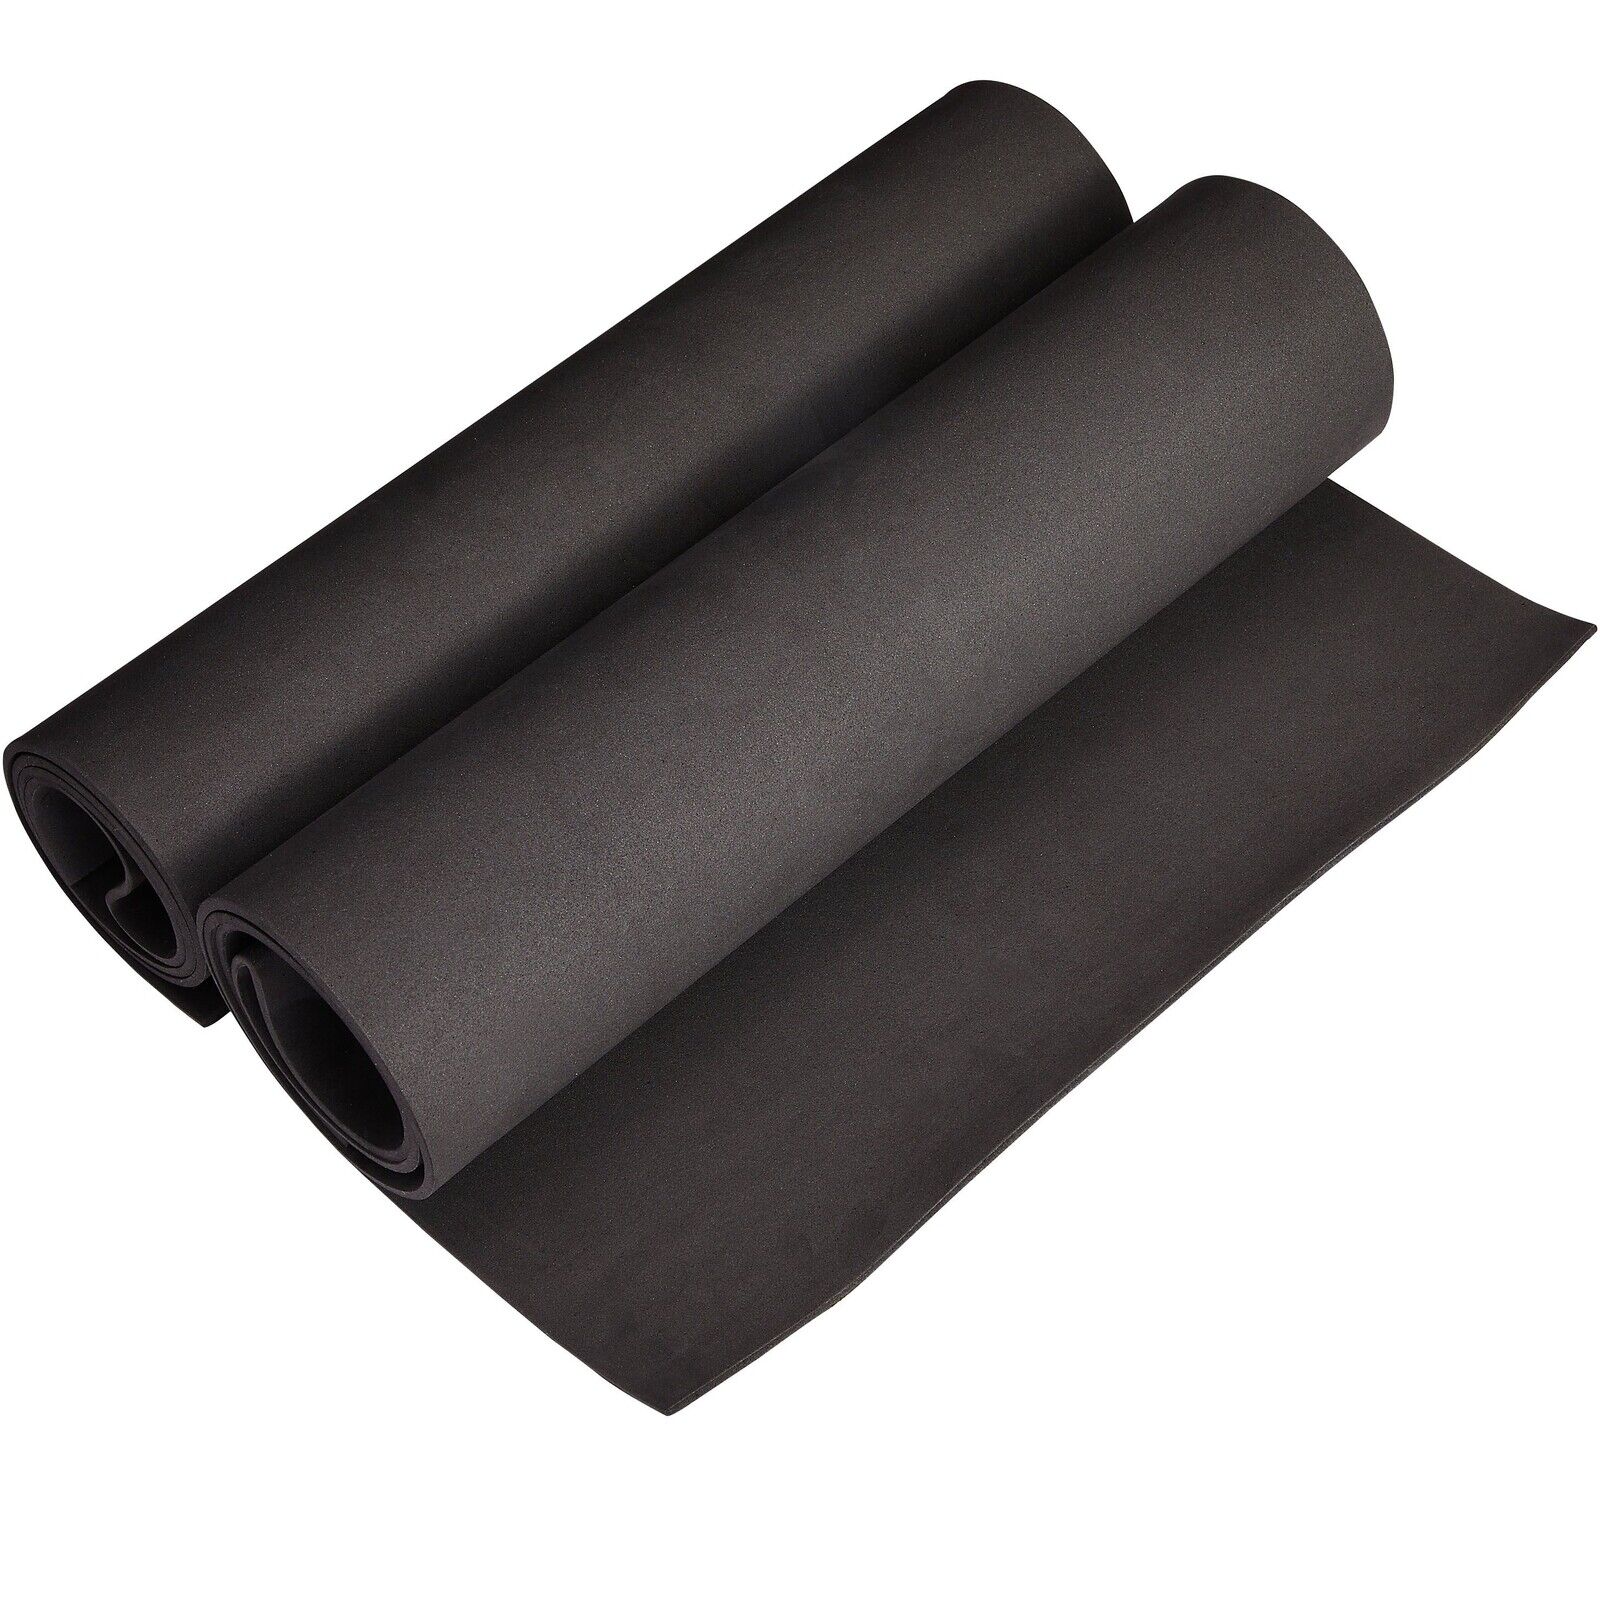 2 Pack Black EVA Foam Roll, 3mm High Density Sheets for Crafts, Cosplay, 14x39"